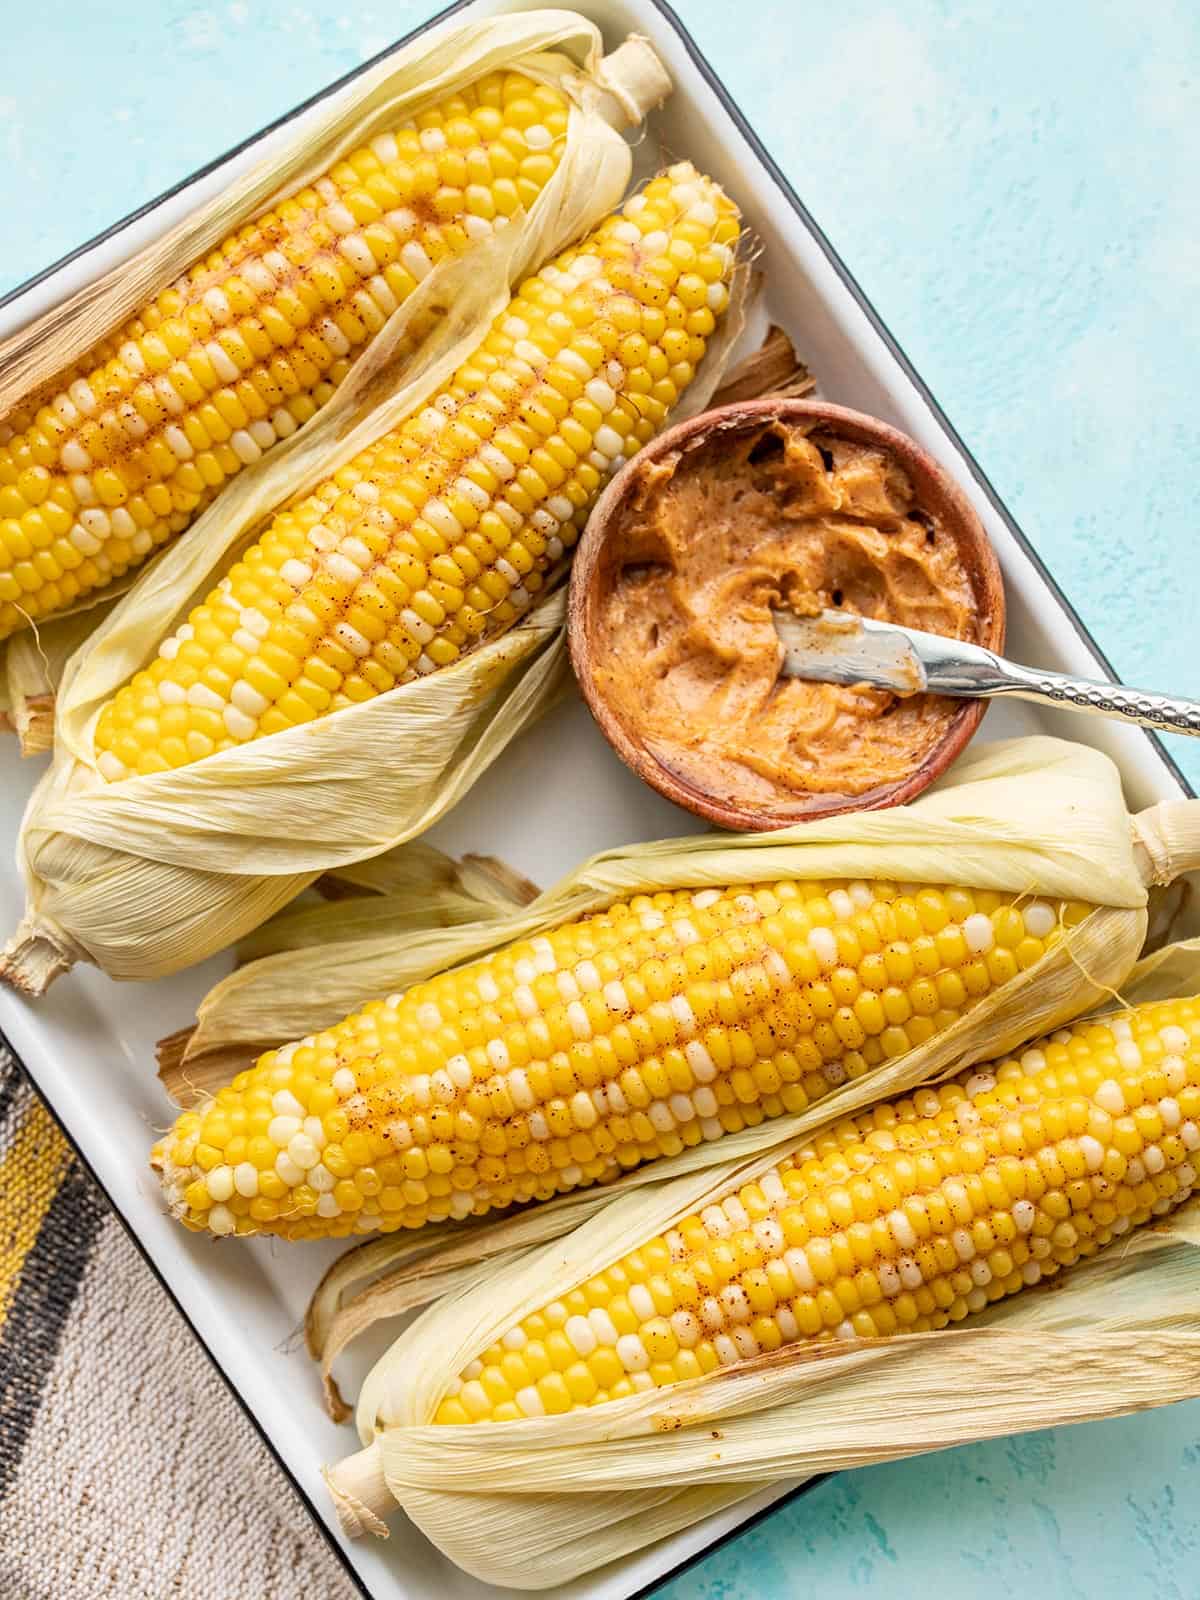 Oven roasted corn half shucked and smeared with honey chili butter on a white tray with a bowl of butter